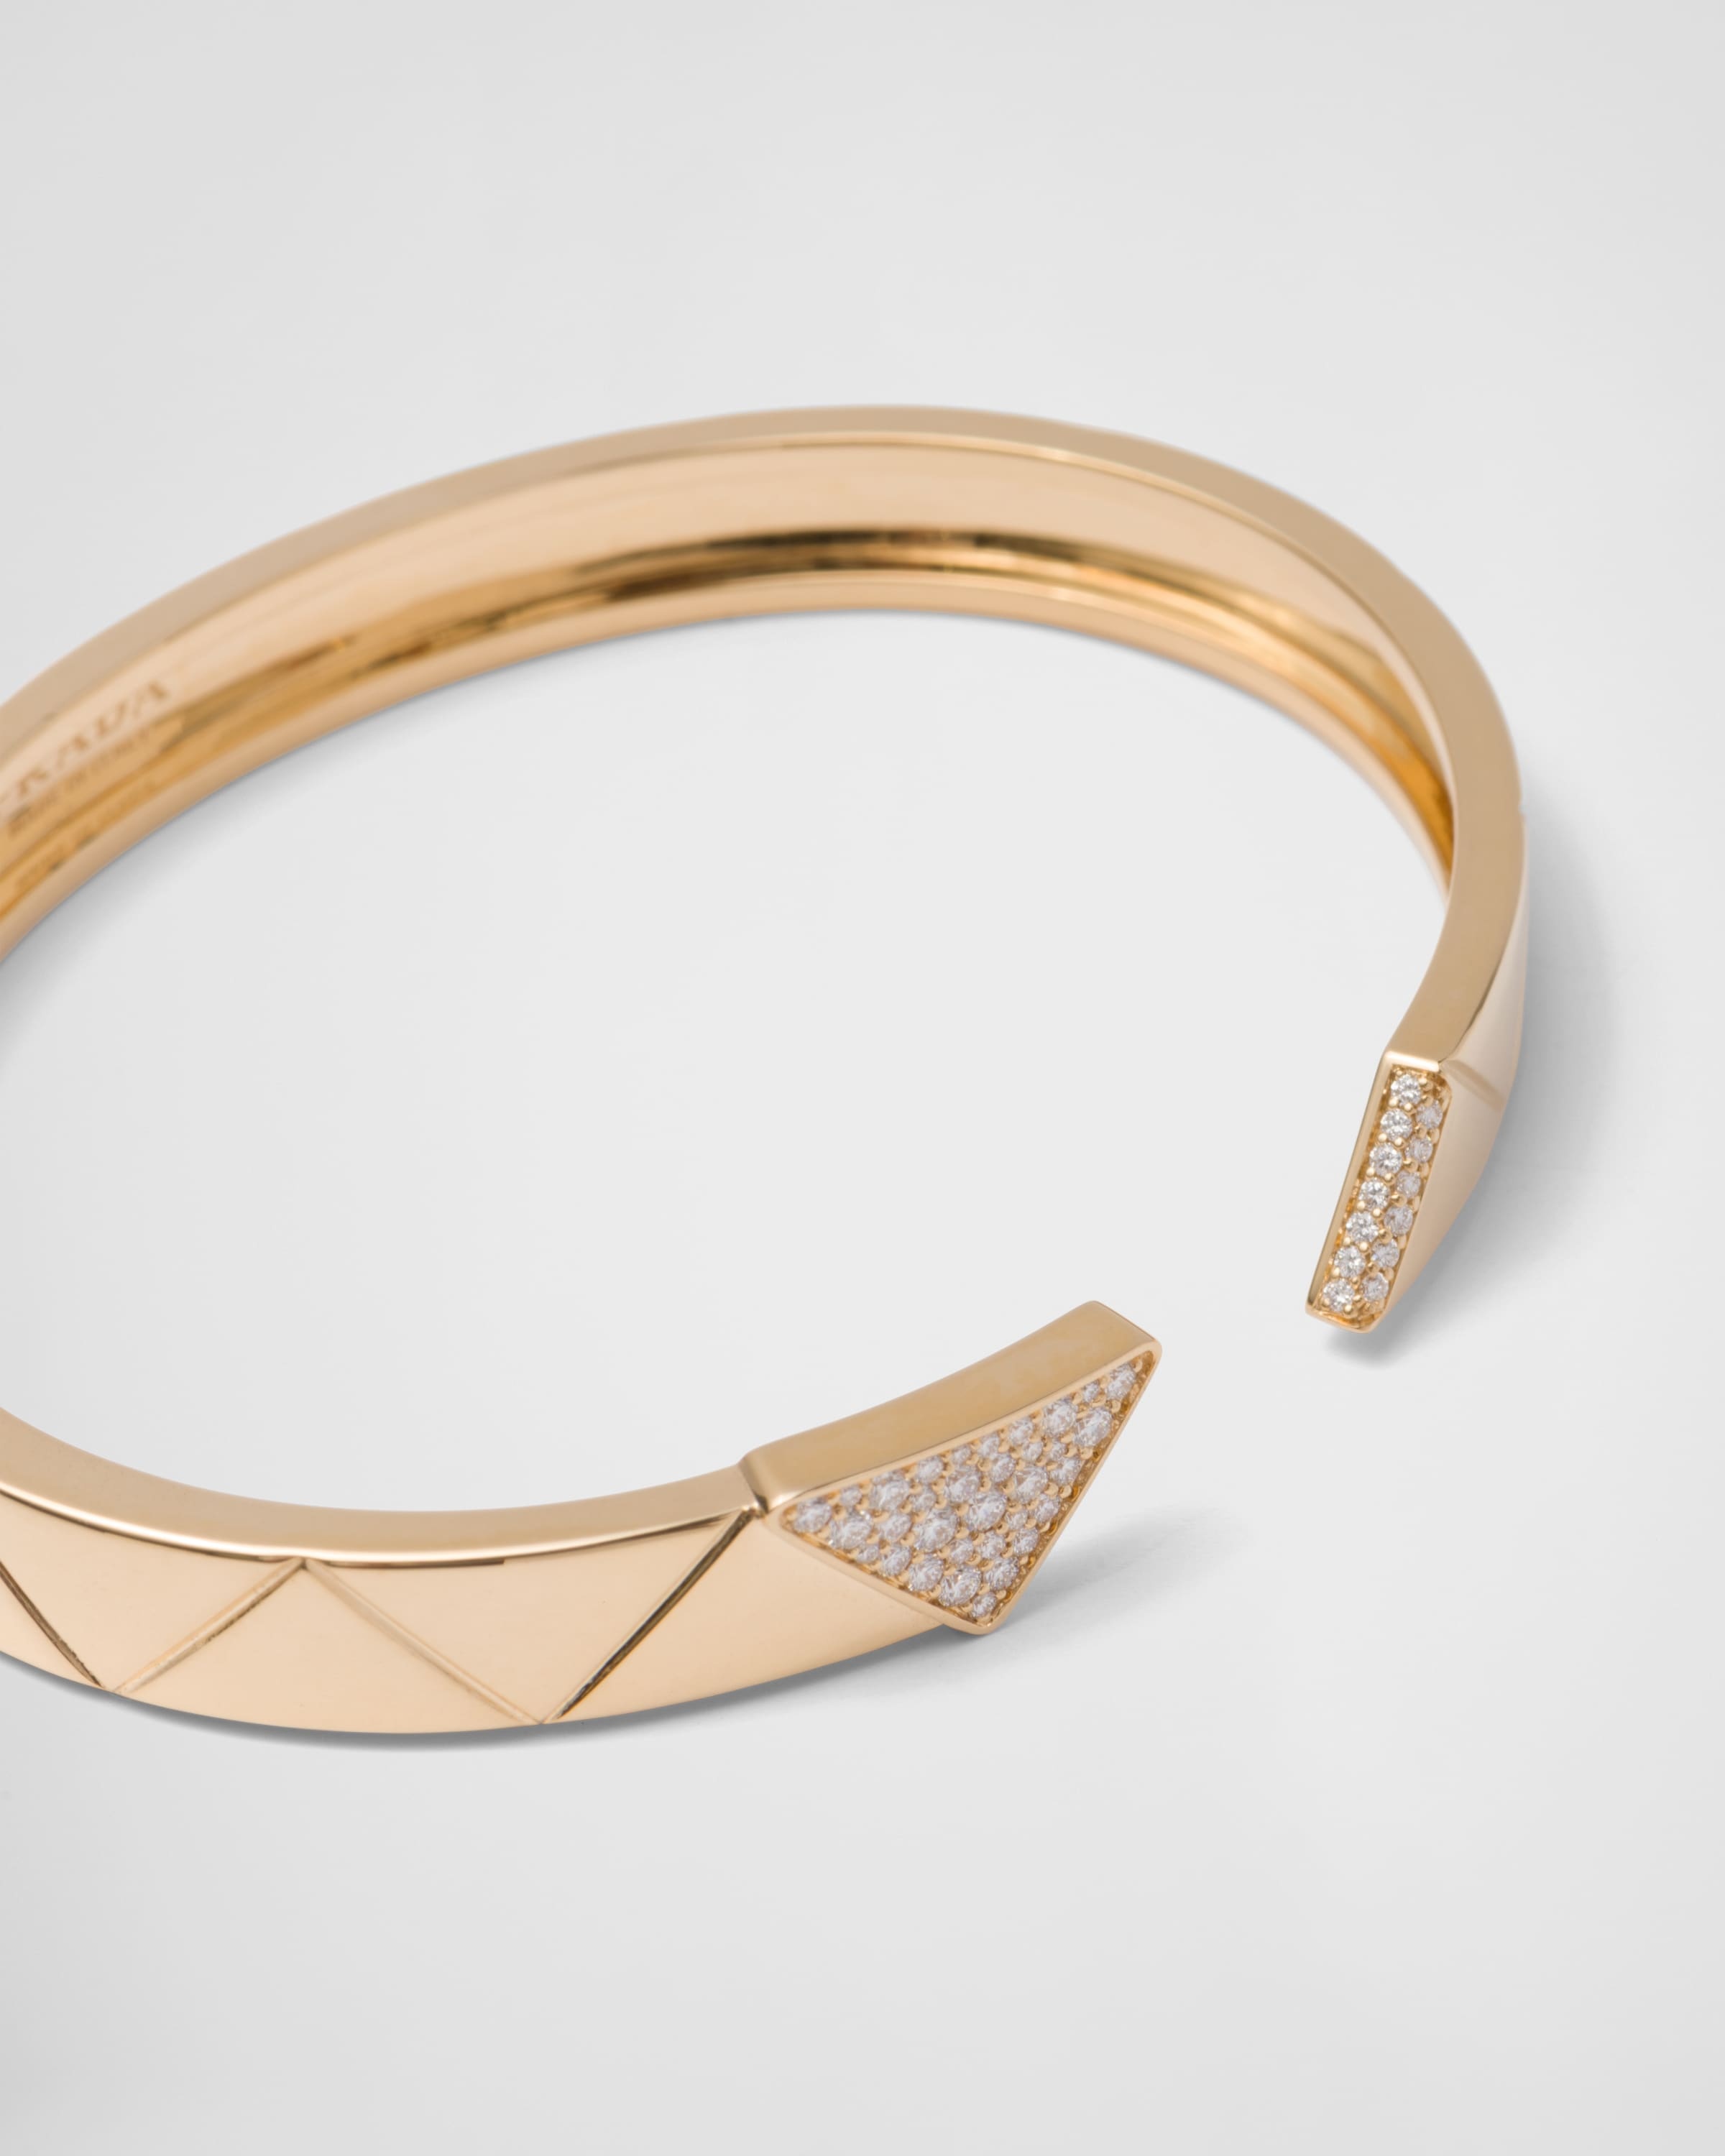 Eternal Gold bangle bracelet in yellow gold with diamonds - 3